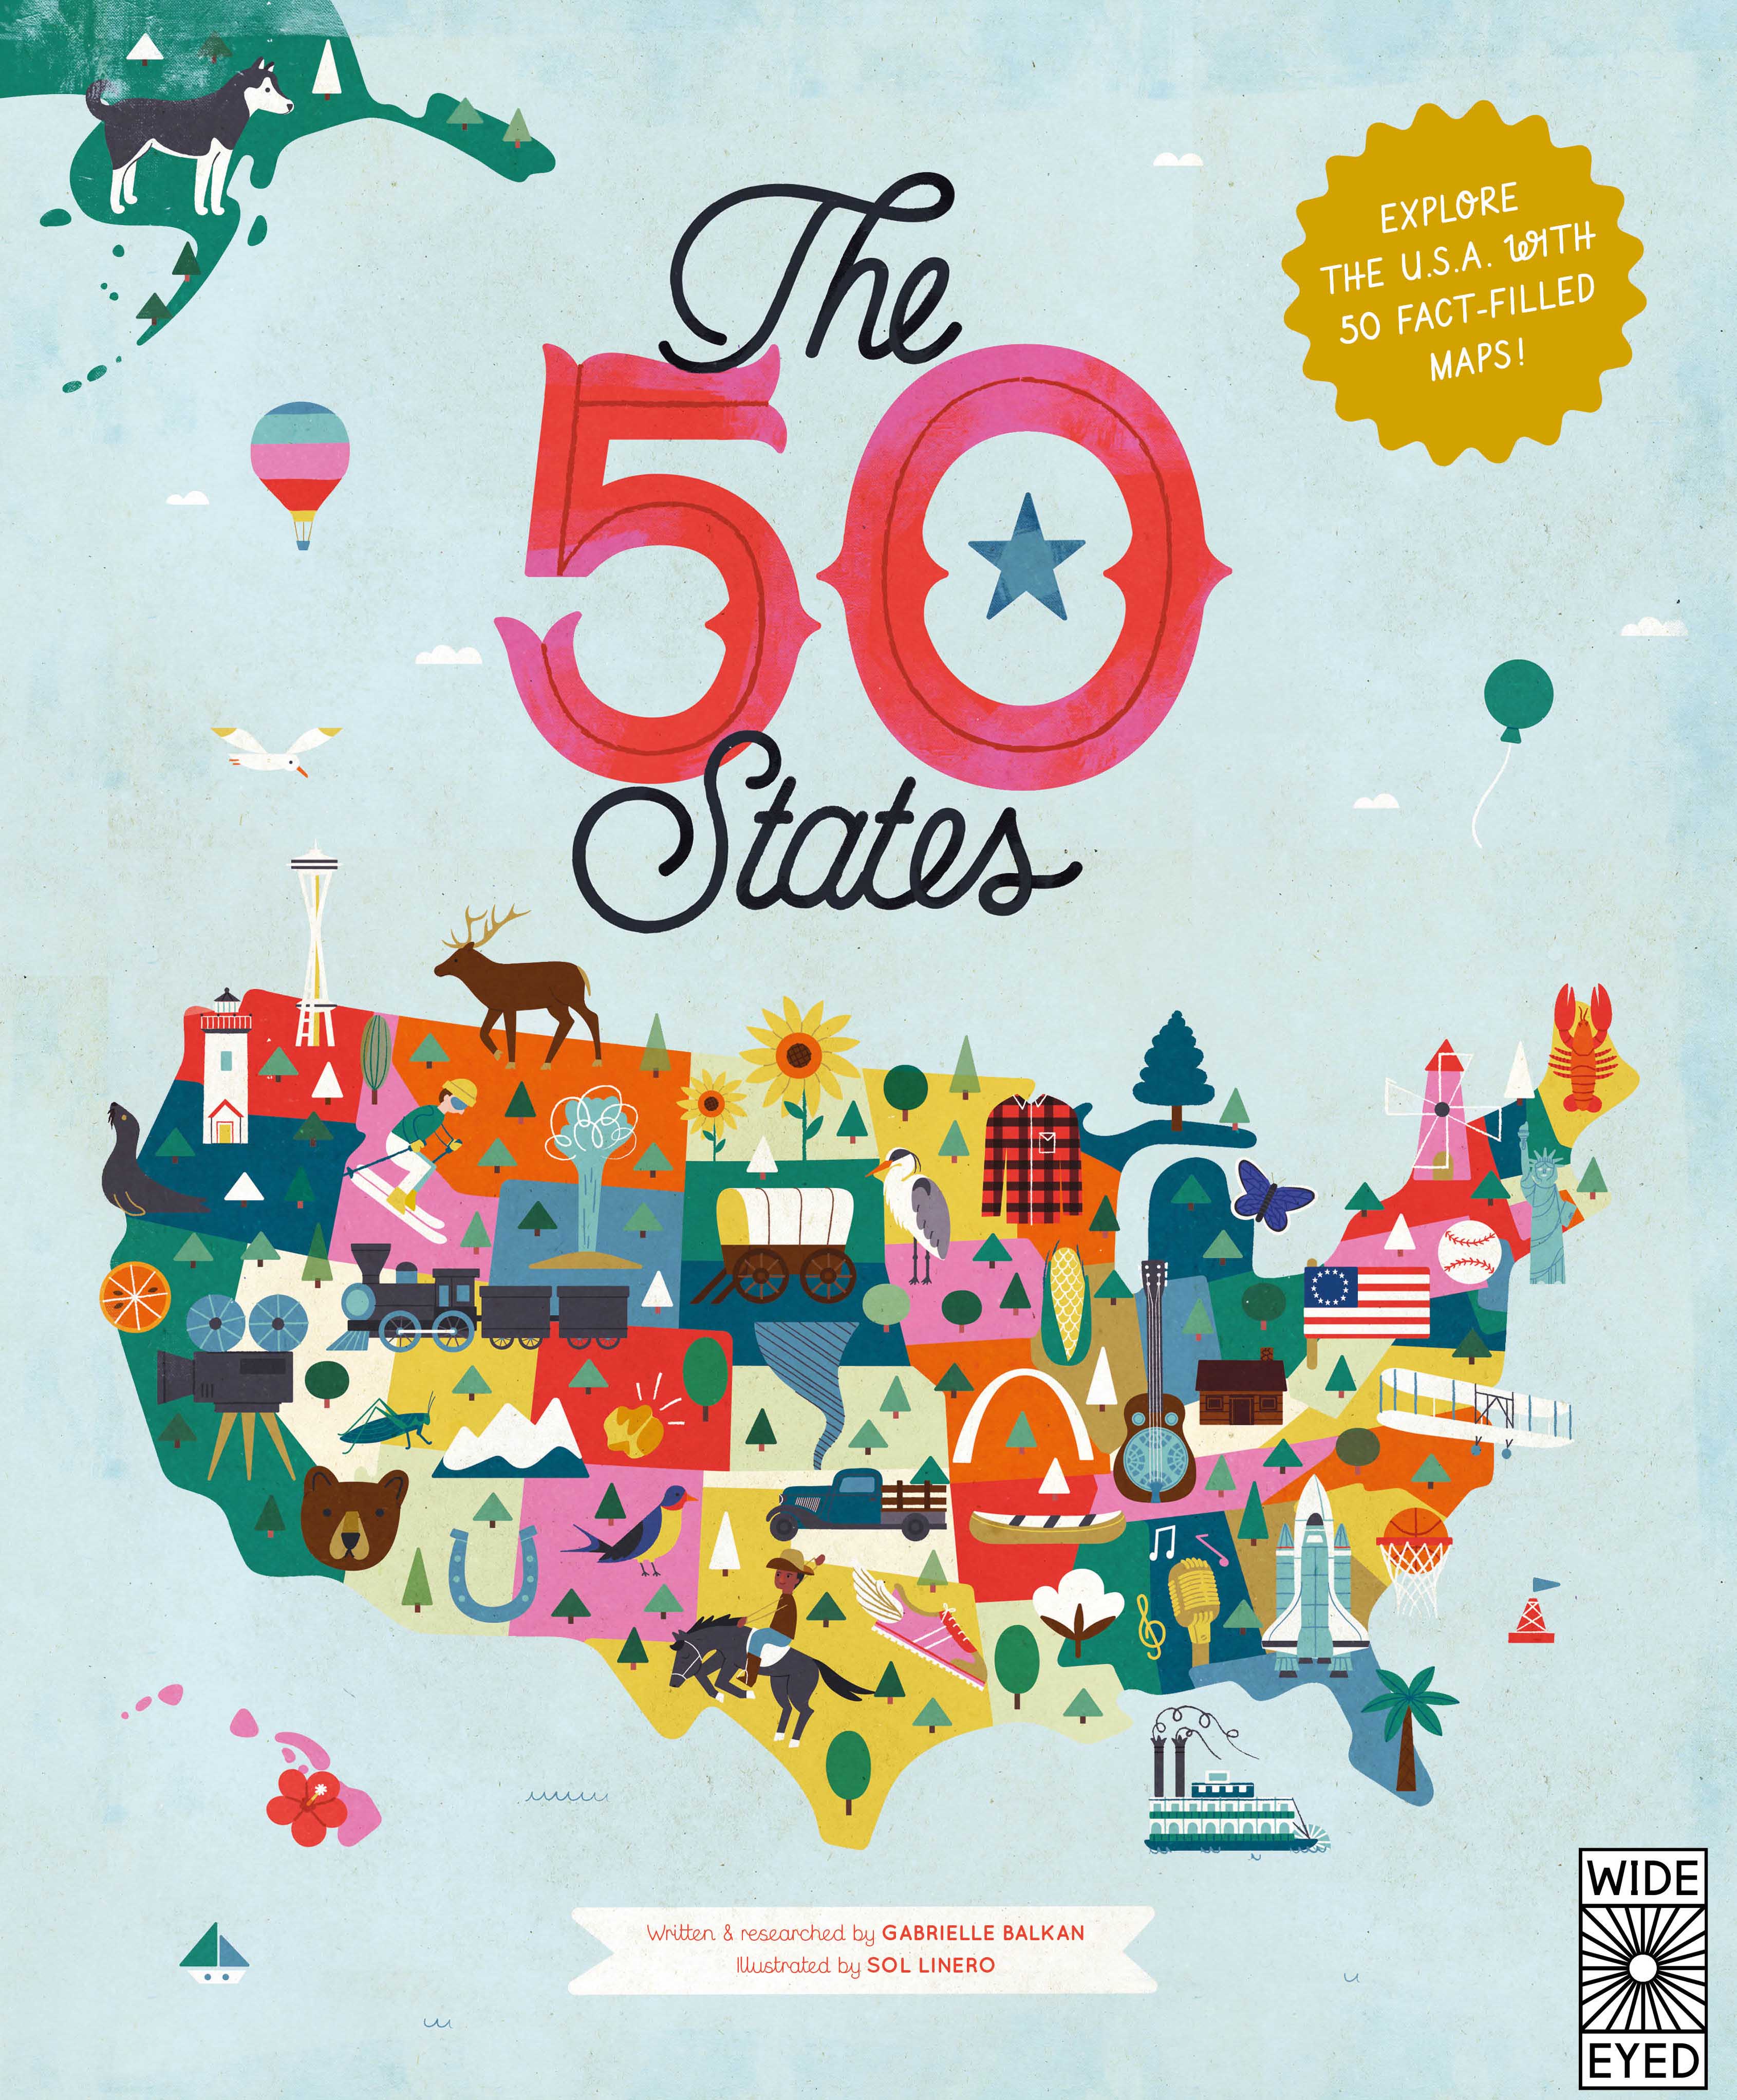 THE 50 STATES : EXPLORE THE U.S.A. WITH 50 FACT-FILLED MAPS!